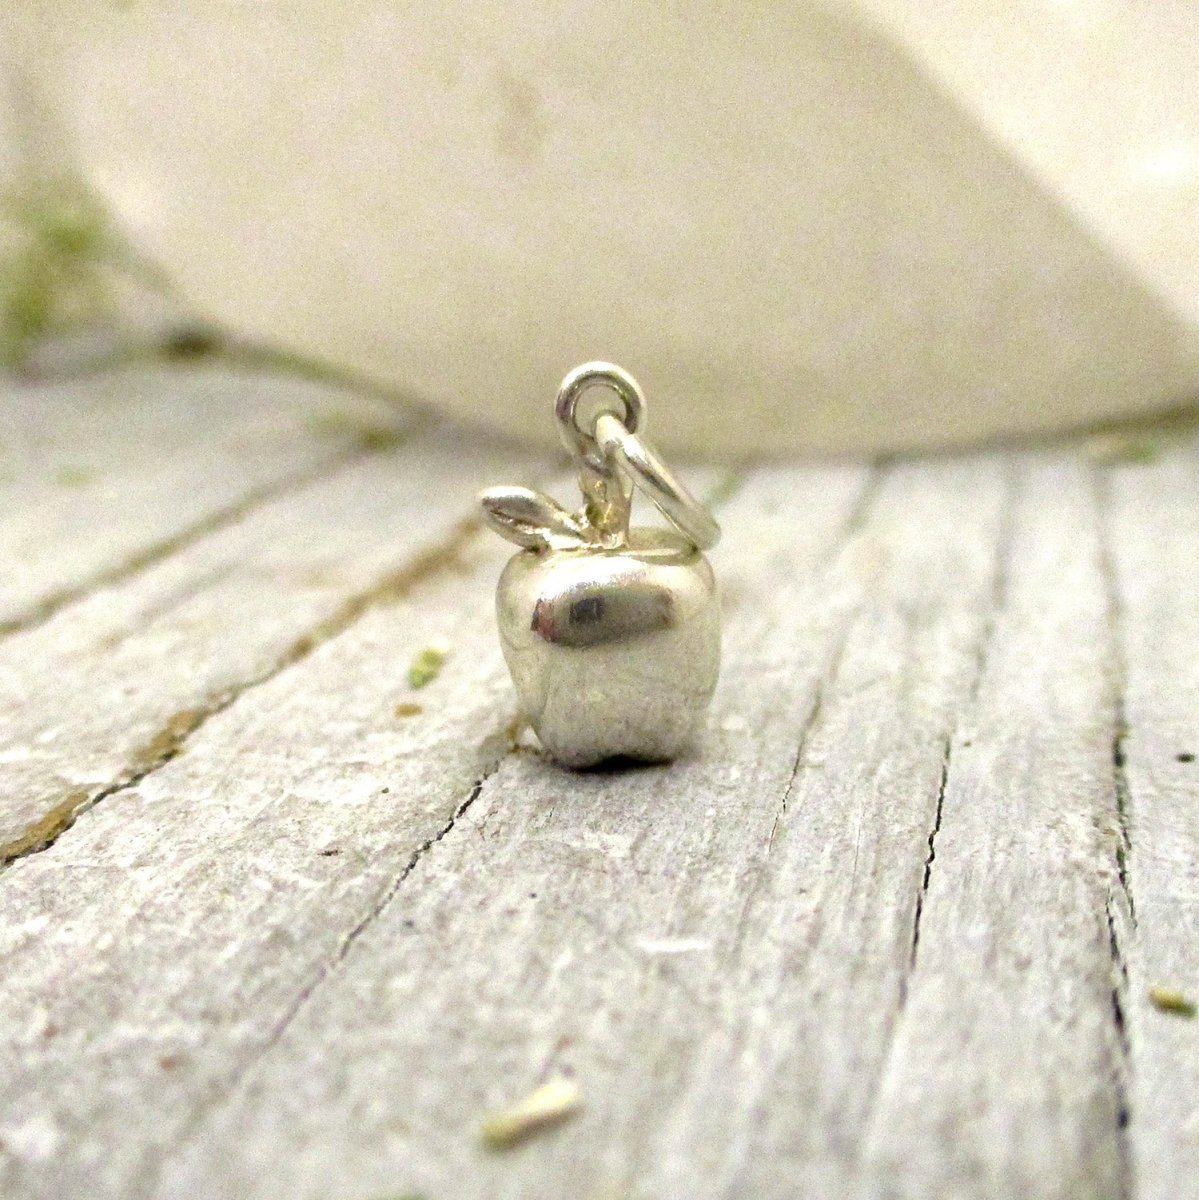 Whole Apple Charm in Solid Sterling Silver - Luxe Design Jewellery